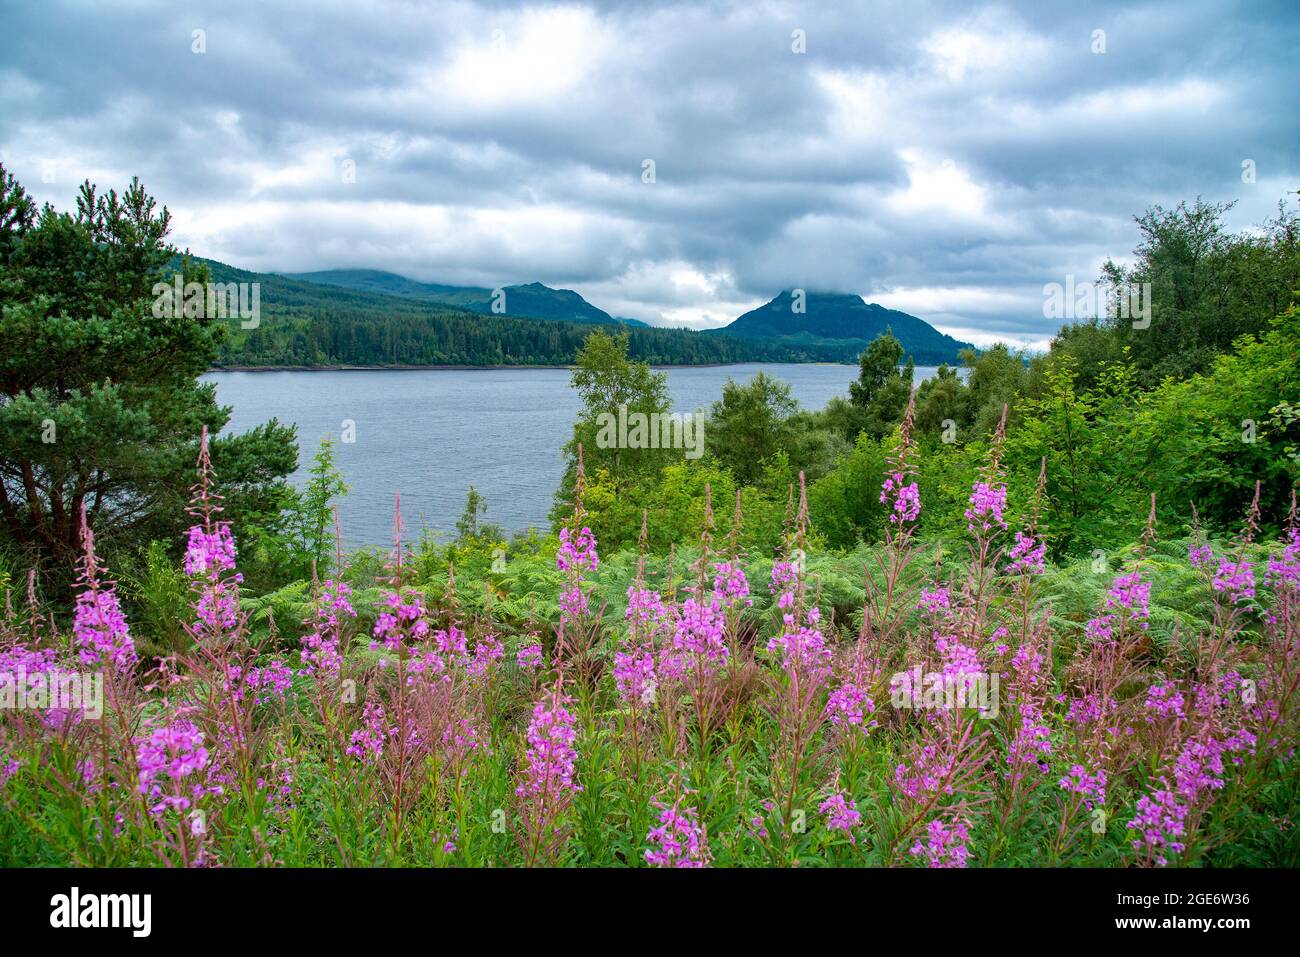 View of Loch Laggan, near Dalwhinnie in the Scottish Highlands, UK Stock Photo